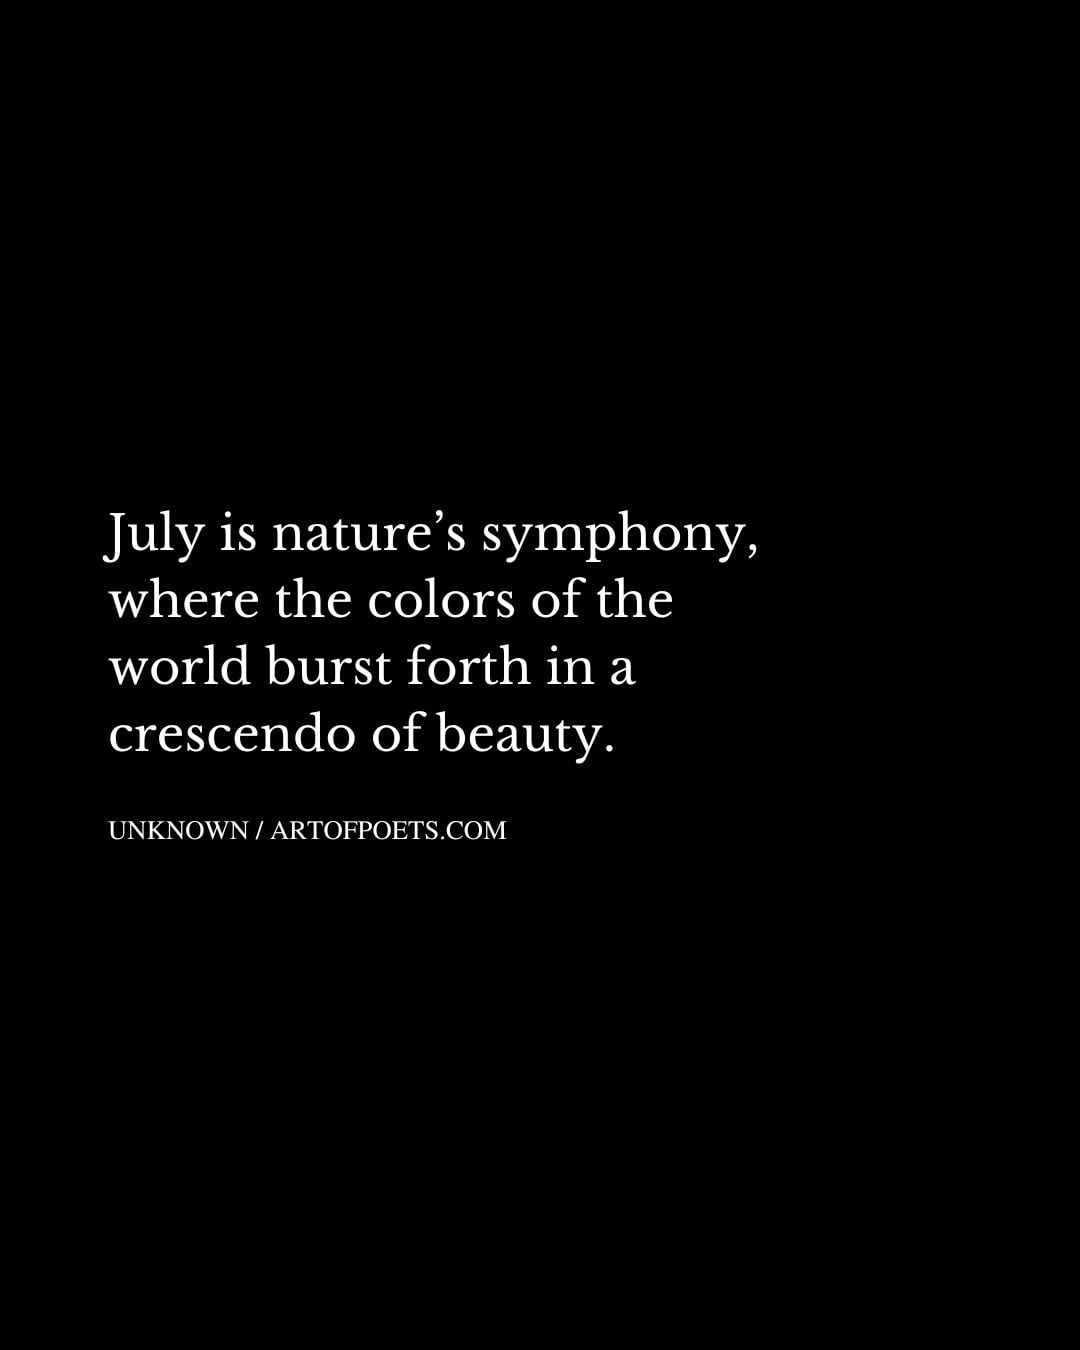 July is natures symphony where the colors of the world burst forth in a crescendo of beauty